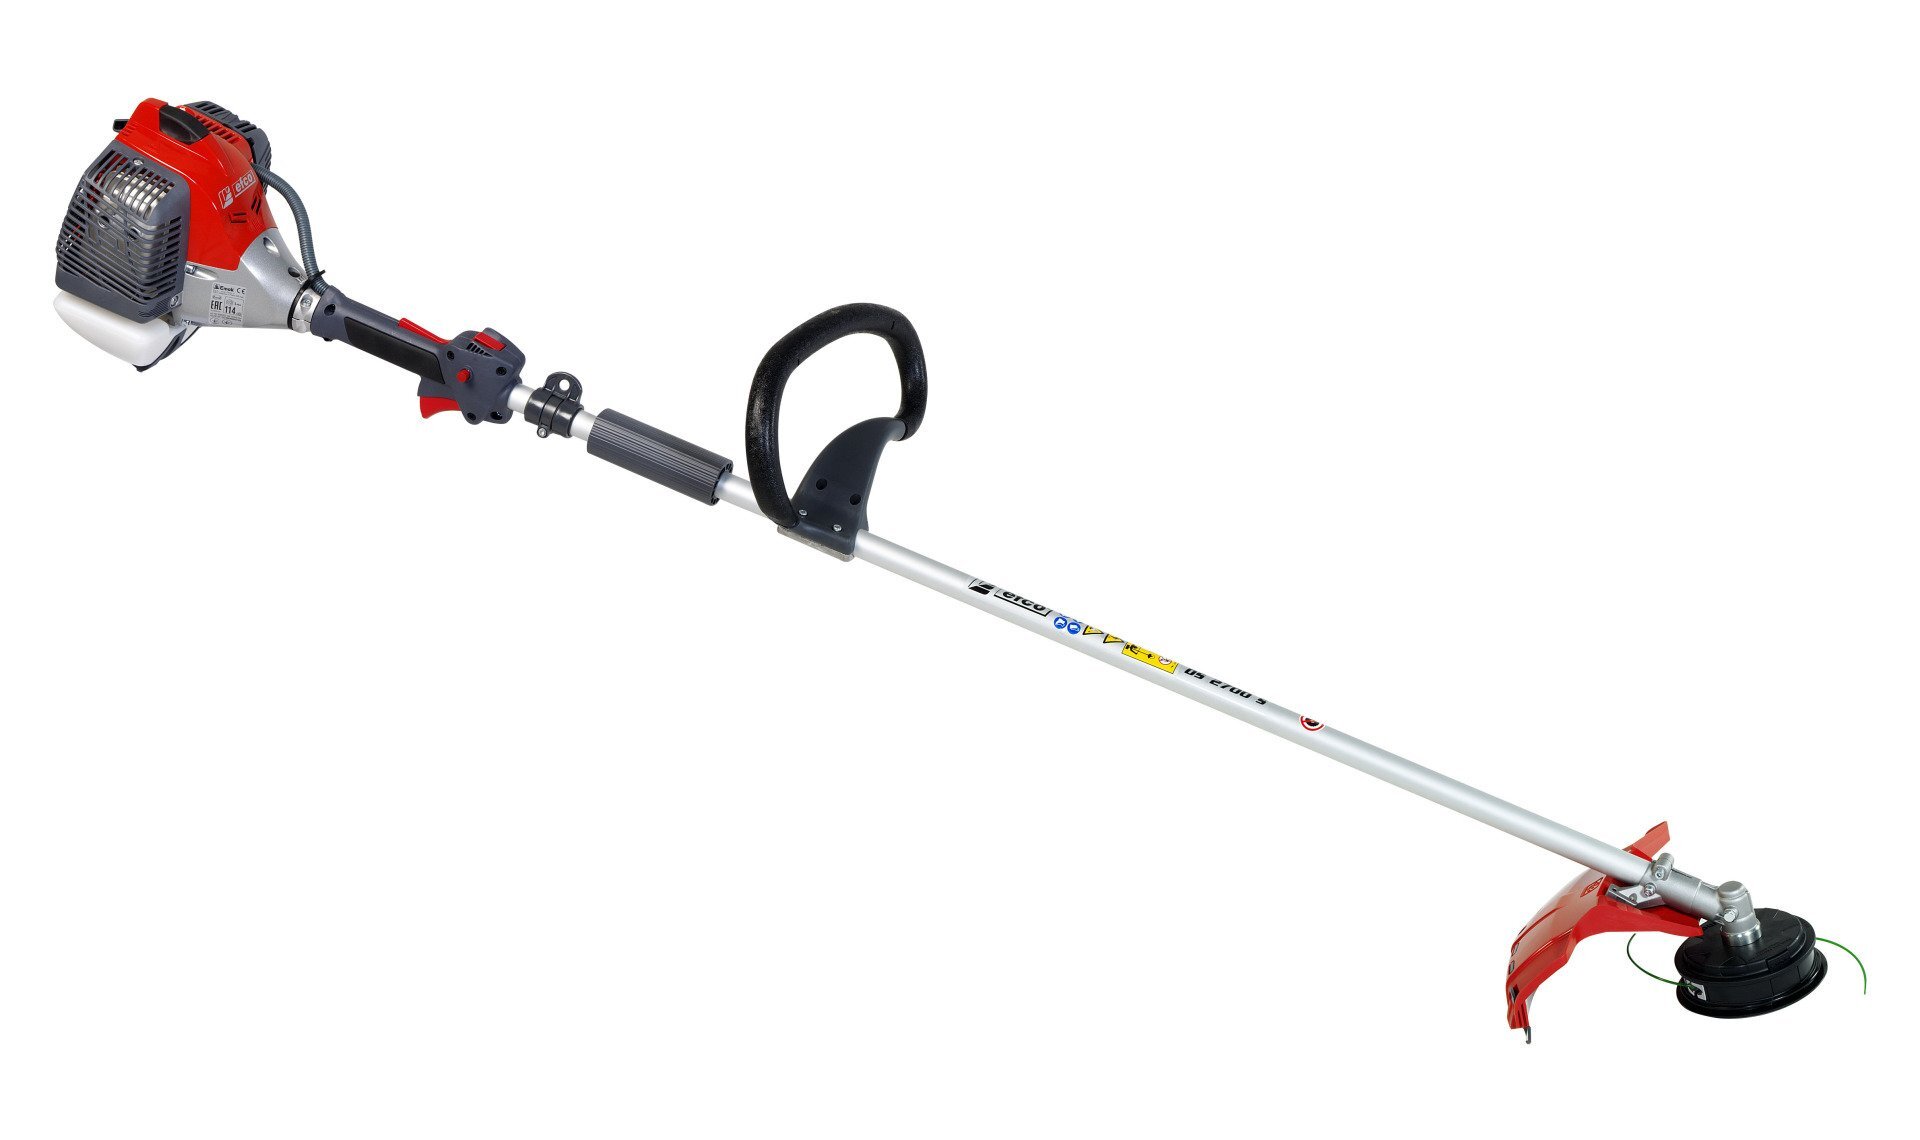 Efco DS2700S 27cc Professional Brushcutter with 4-Tooth Brush Blade 